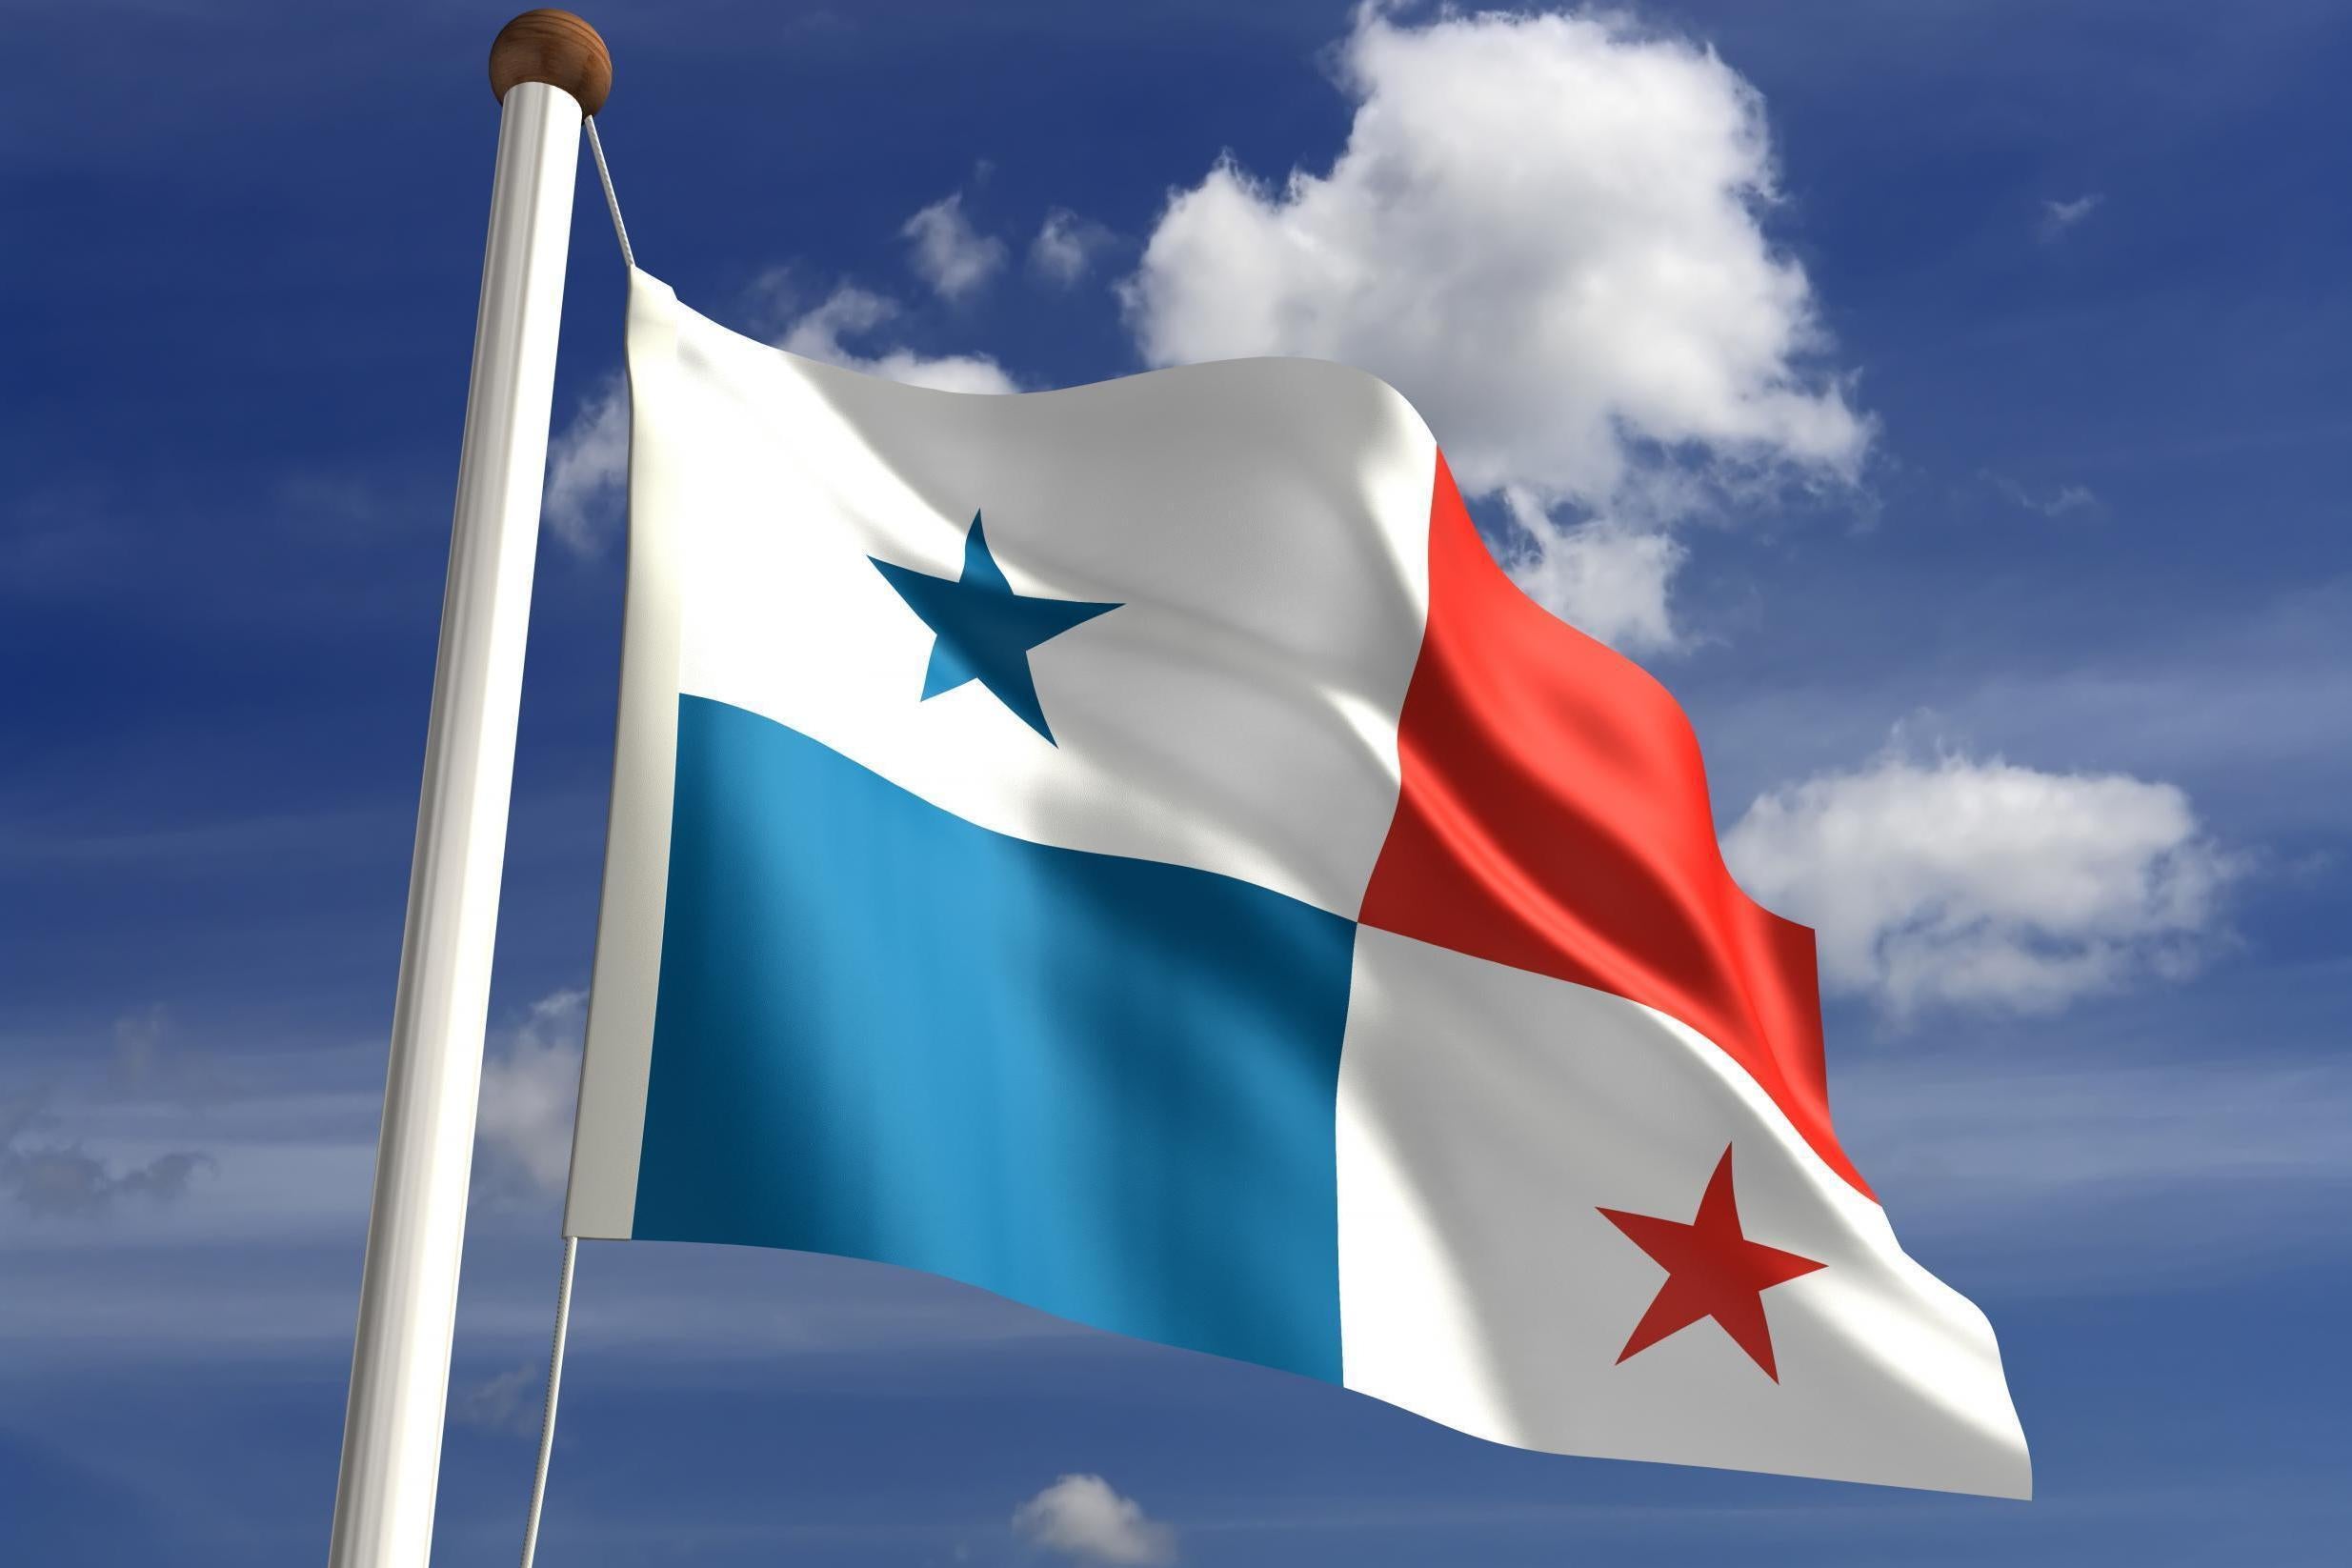 Panama Ship Registry launches new digital services